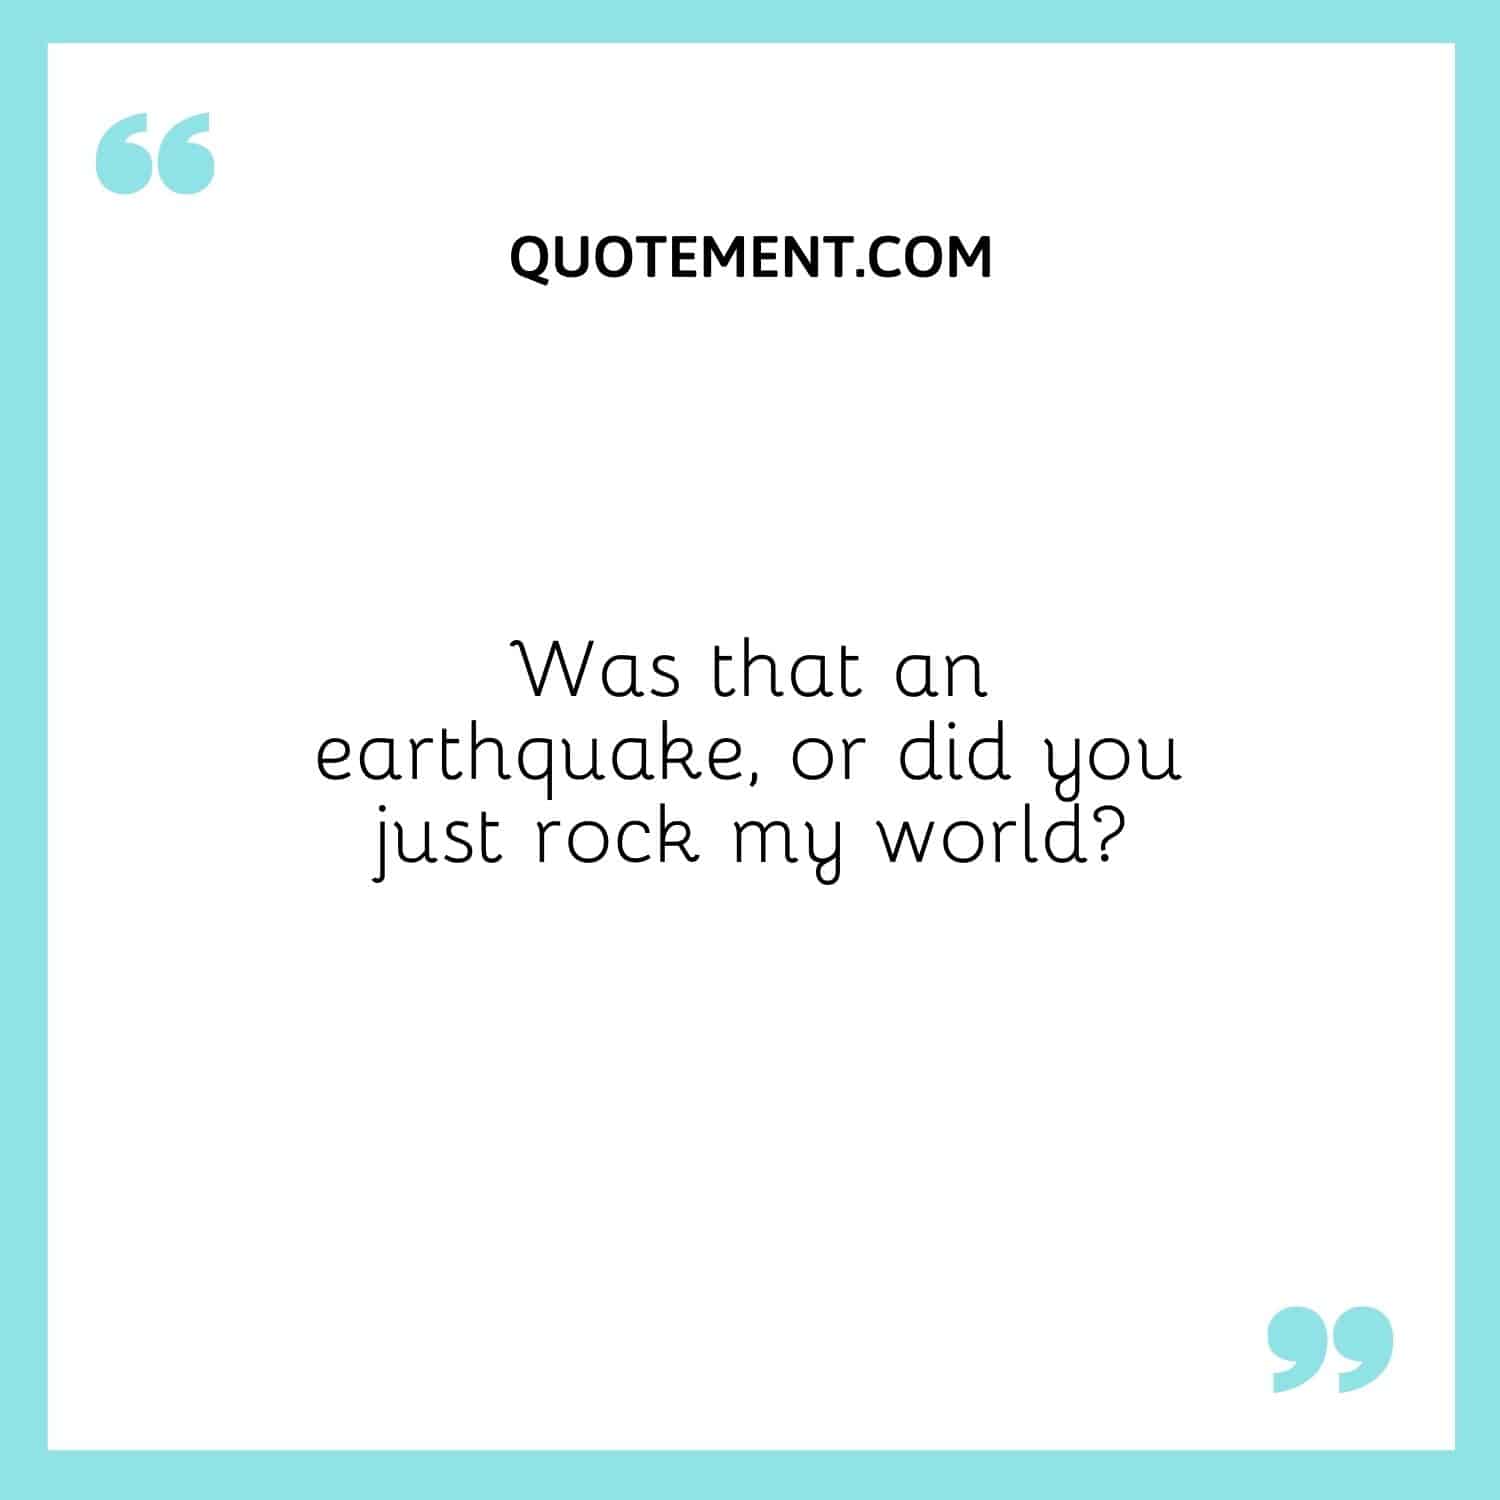 Was that an earthquake, or did you just rock my world